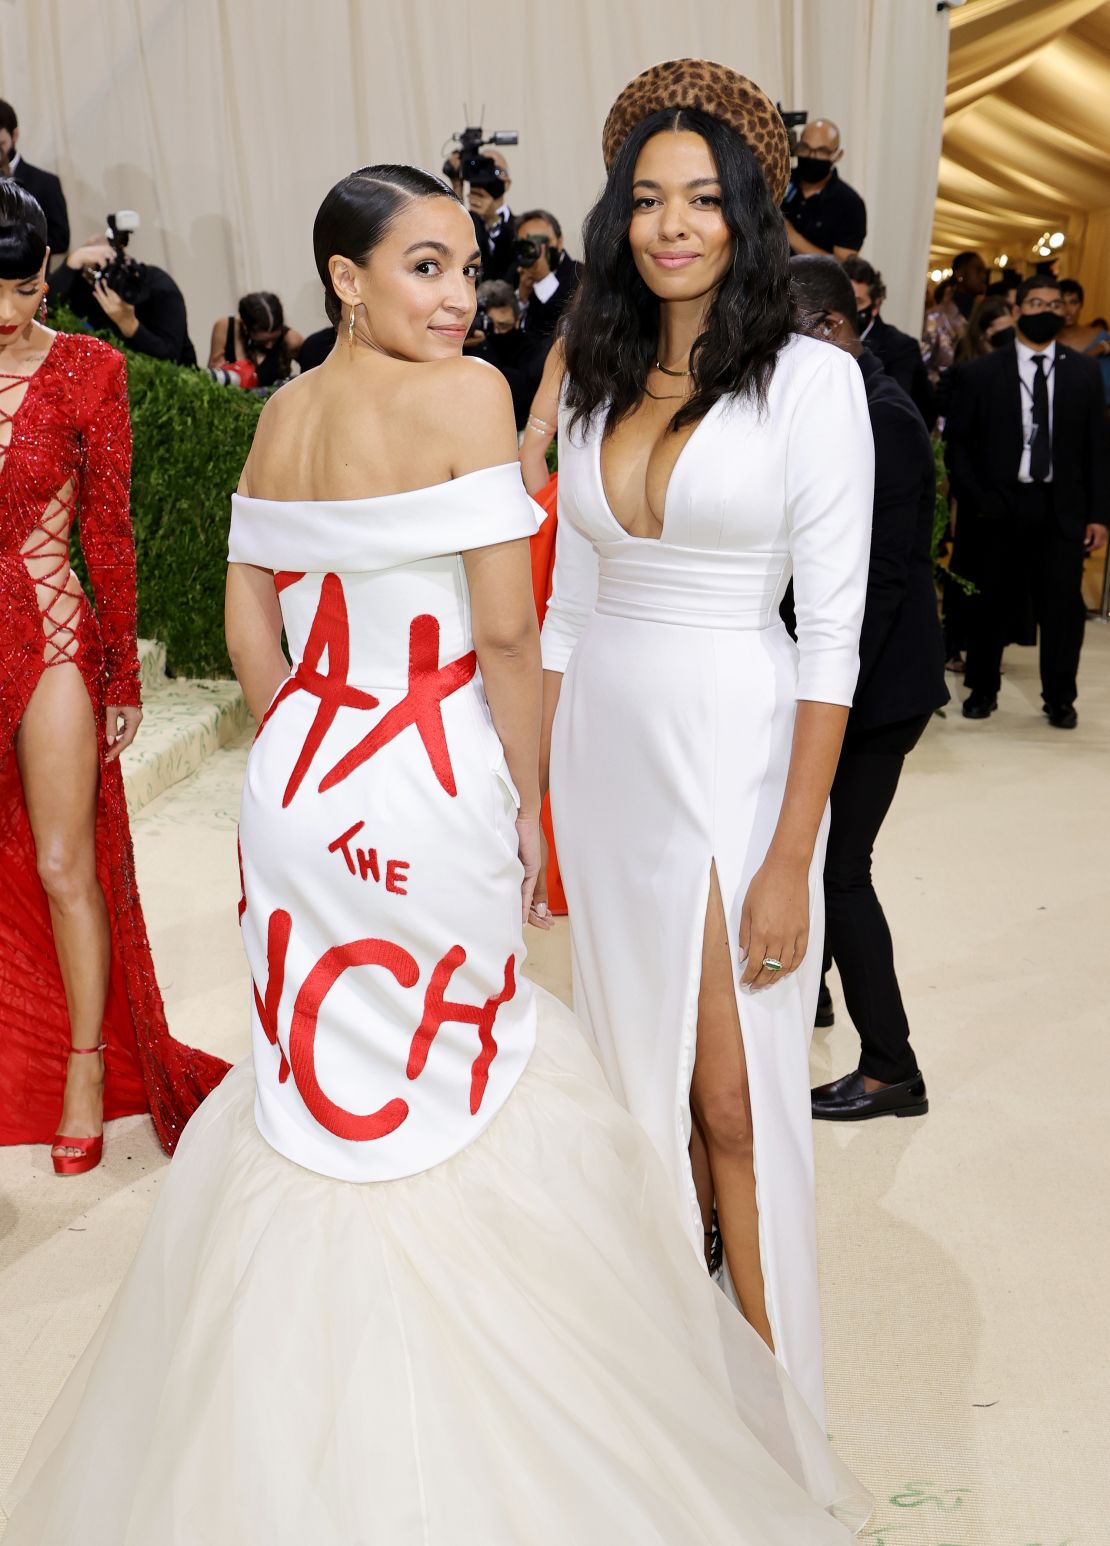 AOC caused a stir with her statement-making Met Gala gown | CNN